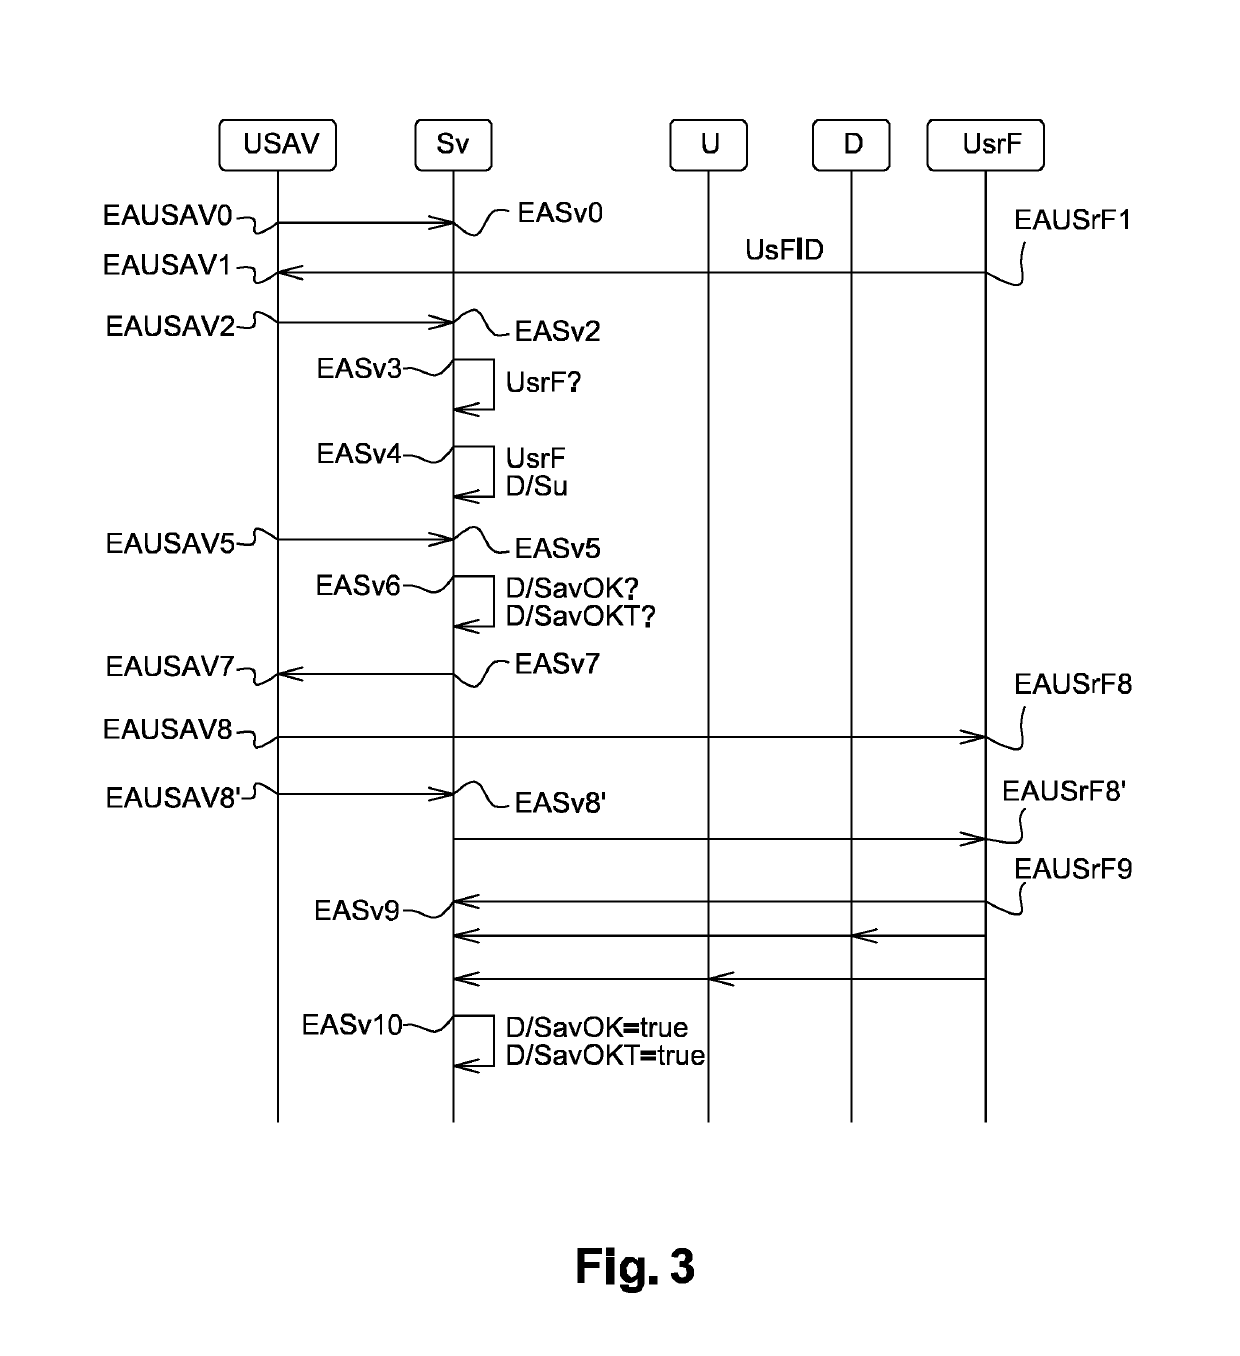 Method for incident management of a home automation installation